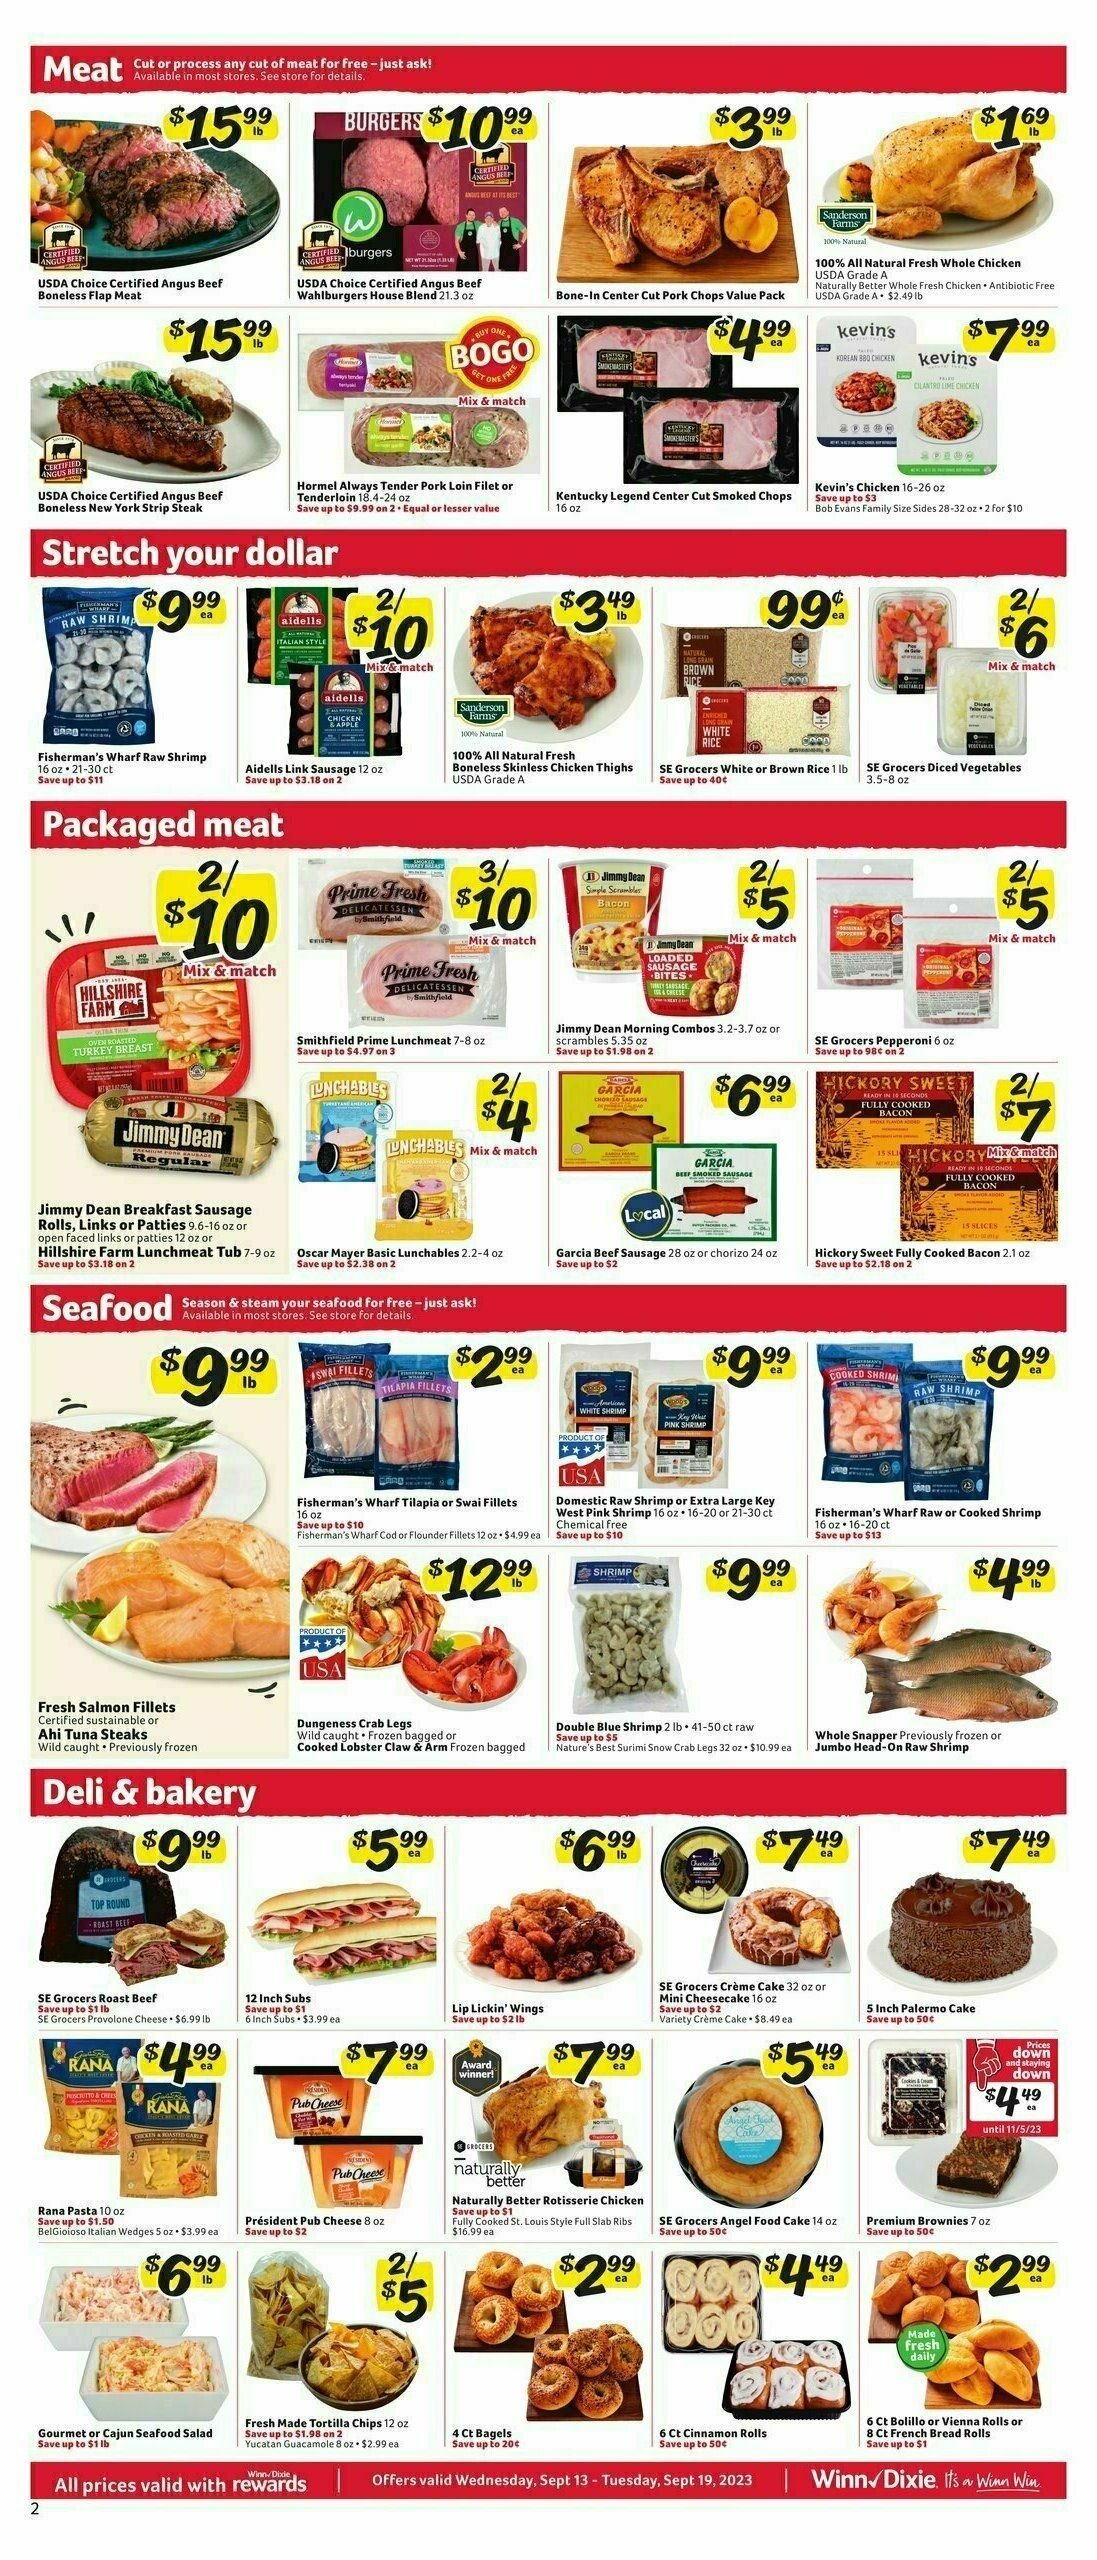 Winn-Dixie Weekly Ad from September 13